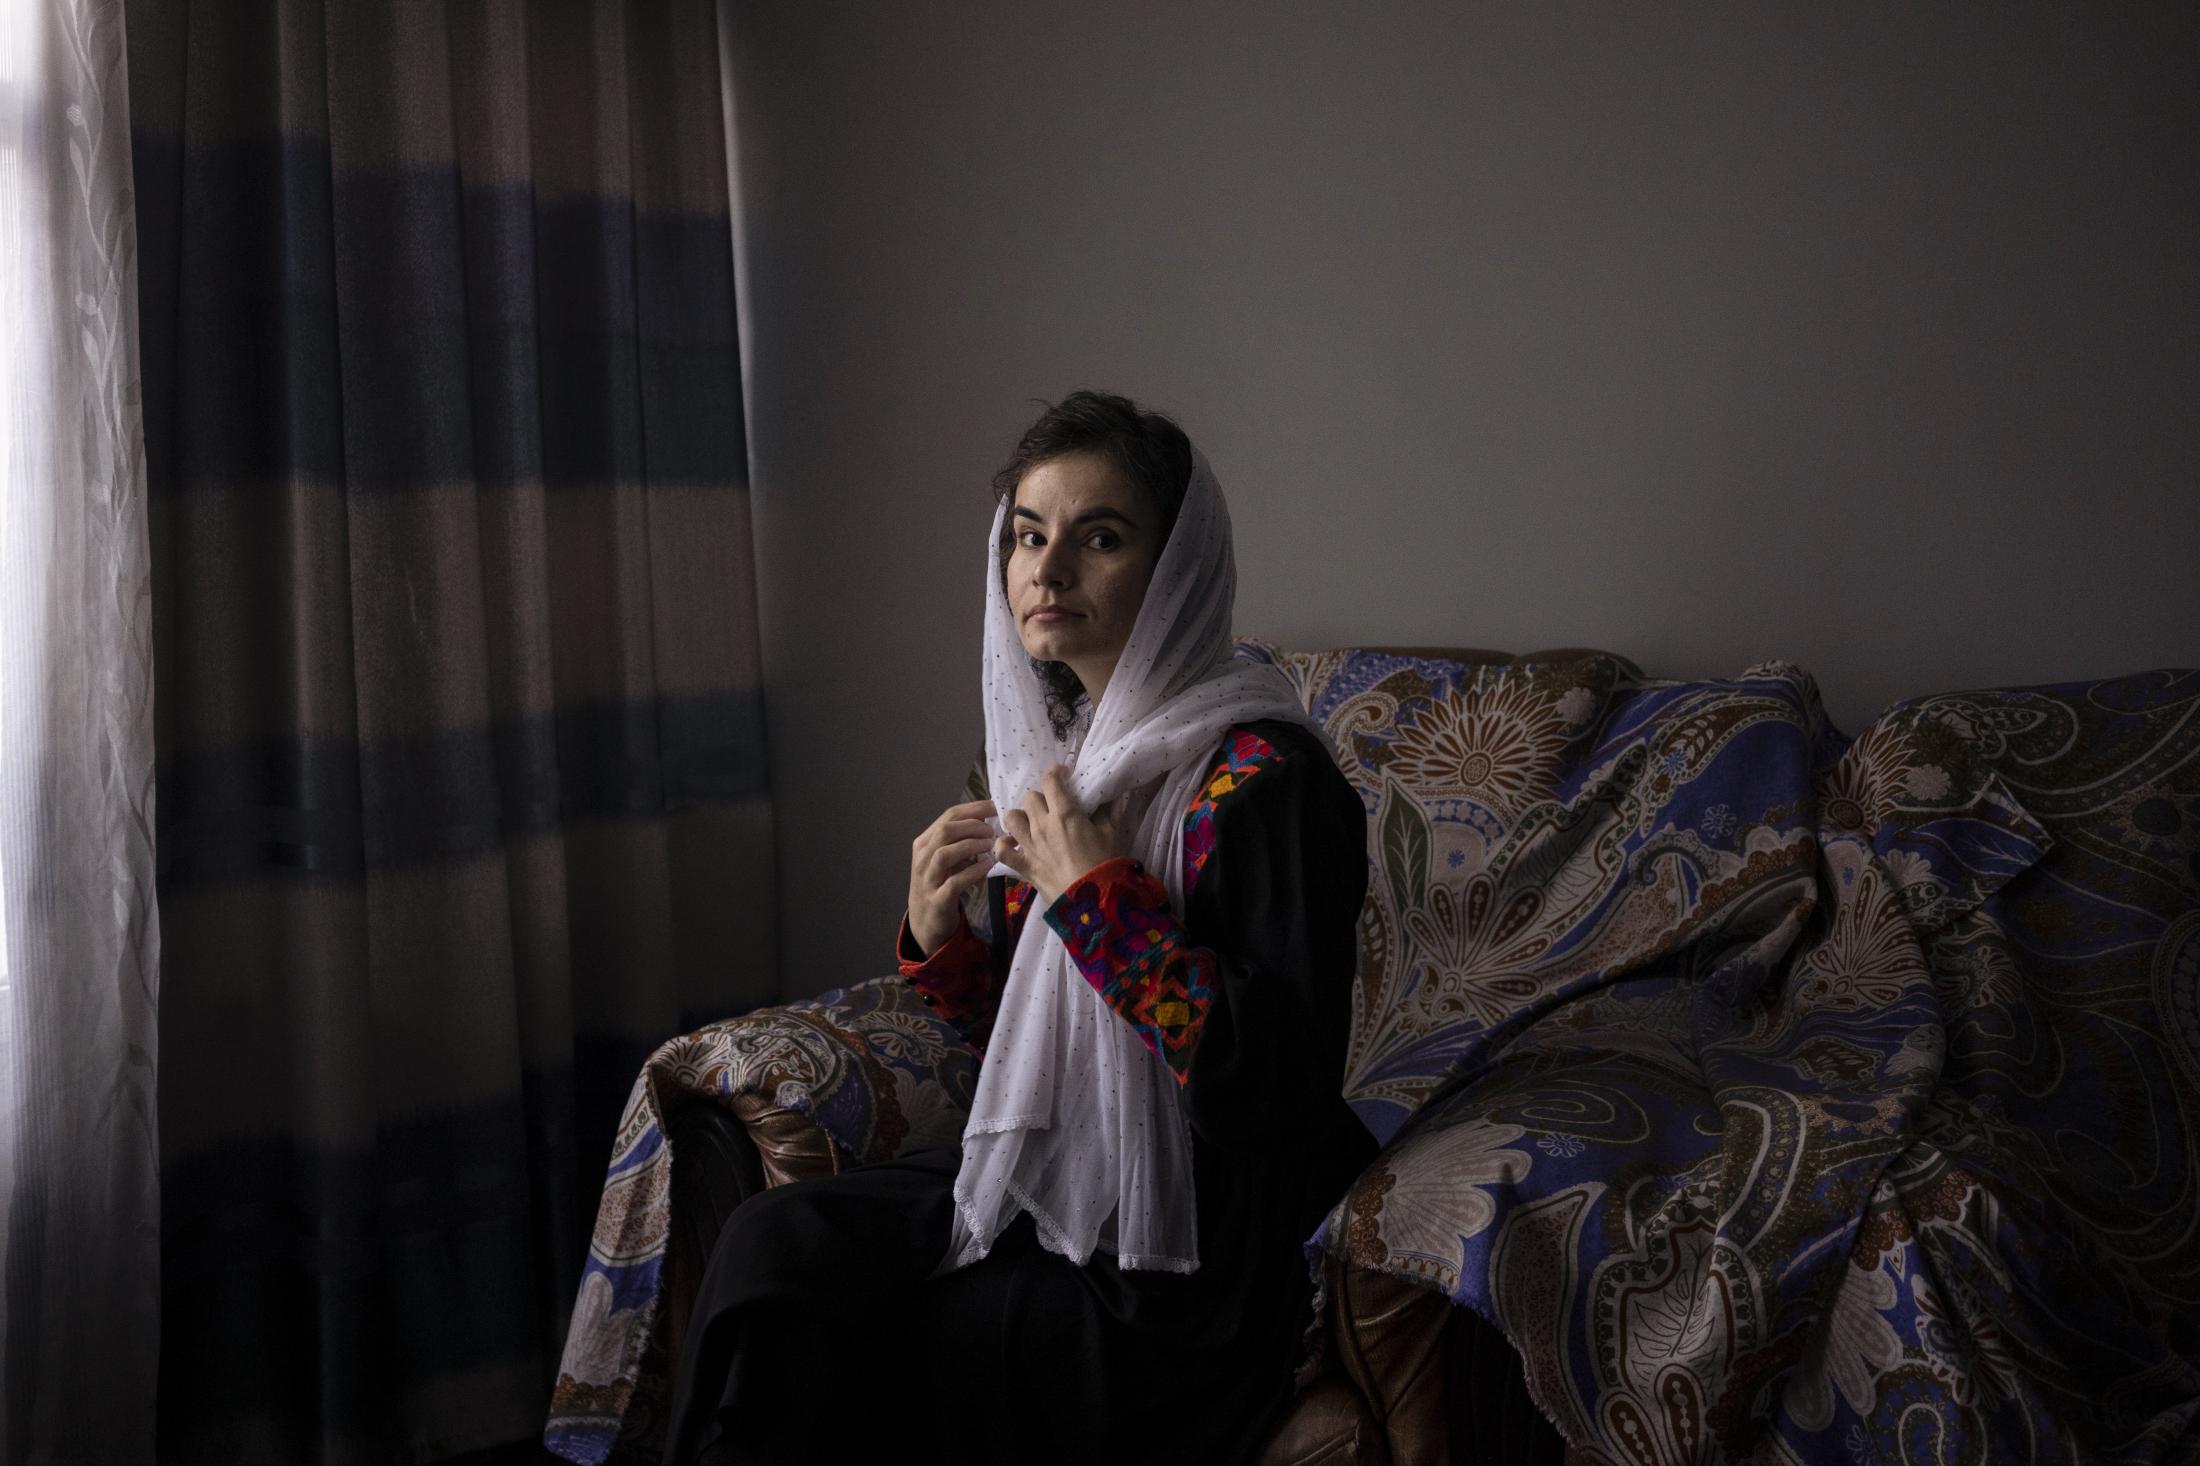 The Cinema of Kabul - Asita Ferdous sits inside her home in Kabul, Afghanistan...